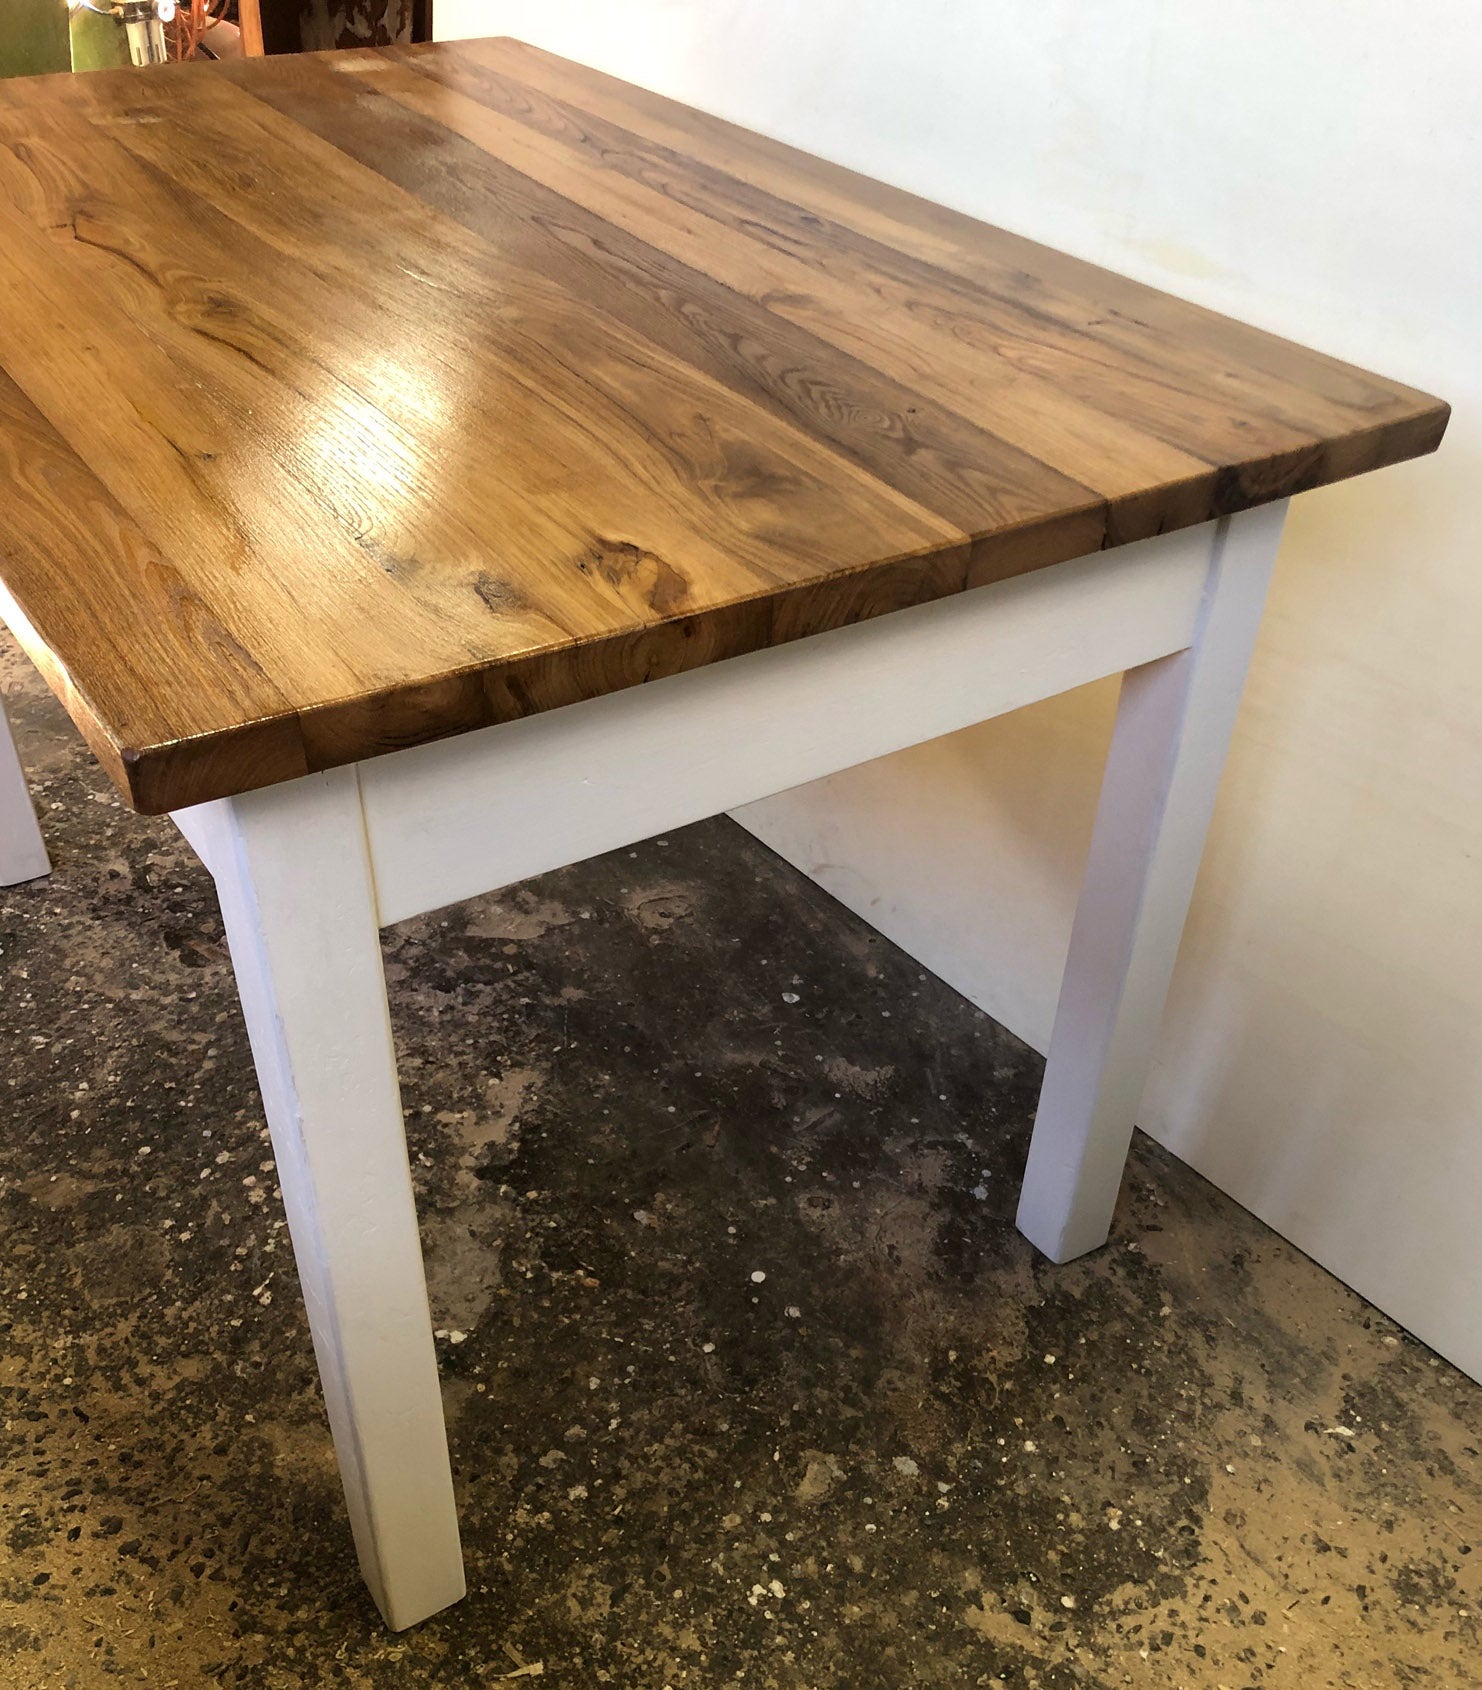 Table in solid chestnut and fir, two-tone, Italian, honey-colored top, very sturdy, with drawer. 
Sturdy and uncommon solid.
Shellac and wax finish. 
Legroom in height 64 cm.
Comes from an old country house in the Garfagnana (mountain near Lucca)